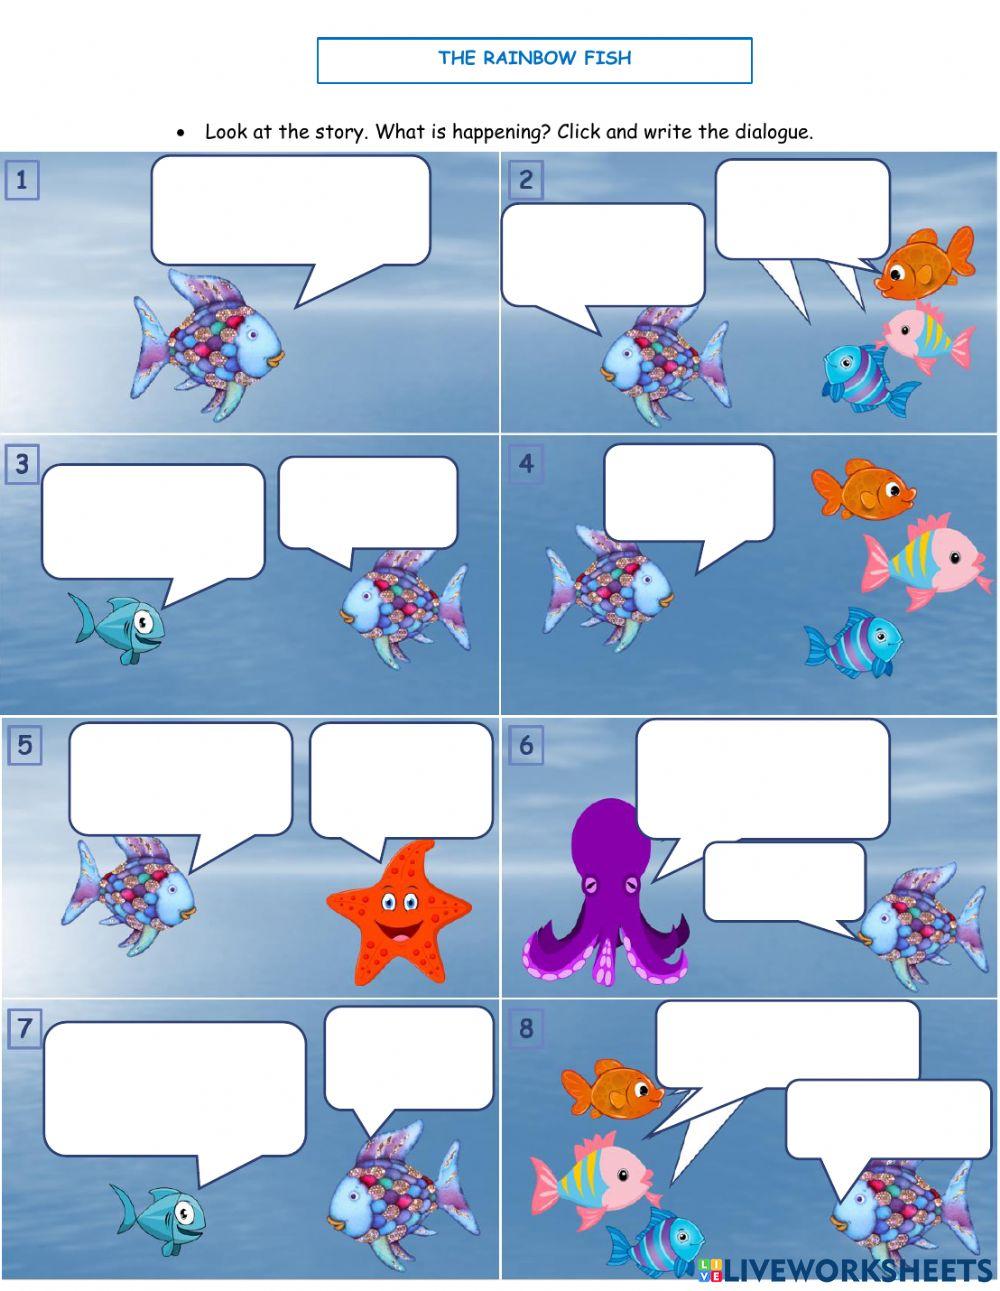 The Rainbow Fish: Fill in the speech bubbles.